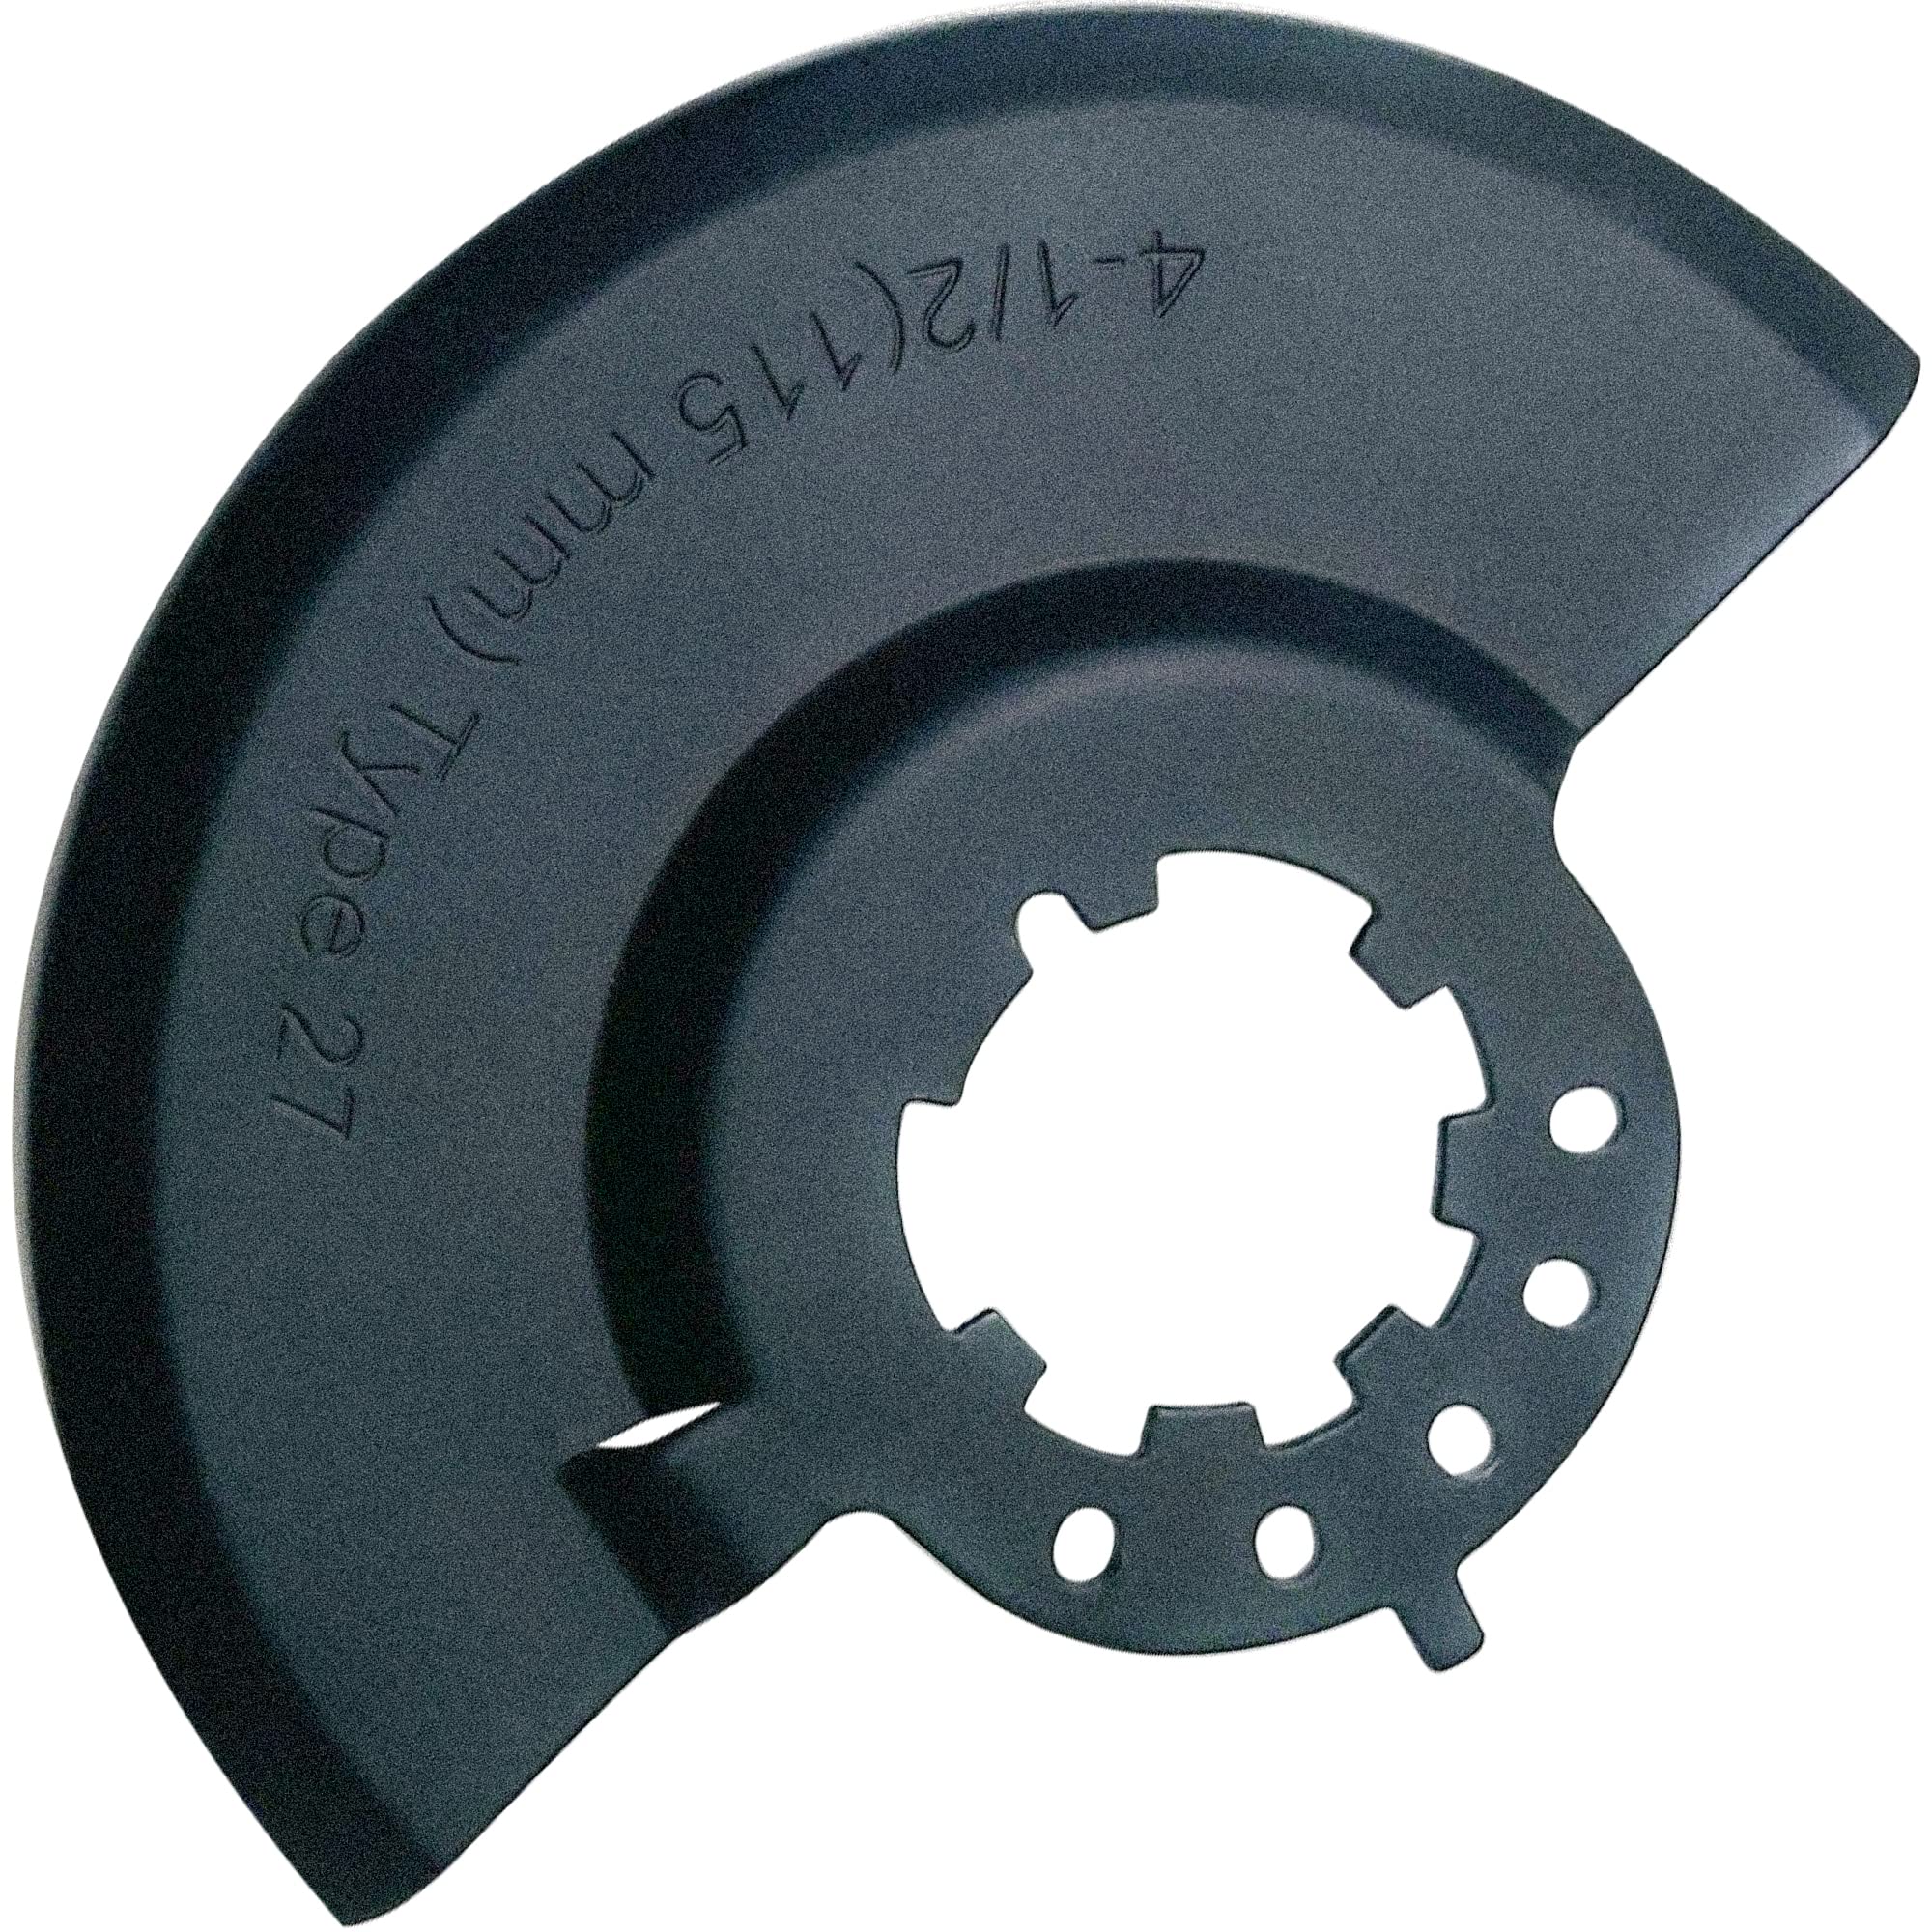 Fortool 43-54-0155 Wheel Blade Guard Type 27 Fits for Milwaukee Grinder 6130-33 C27D